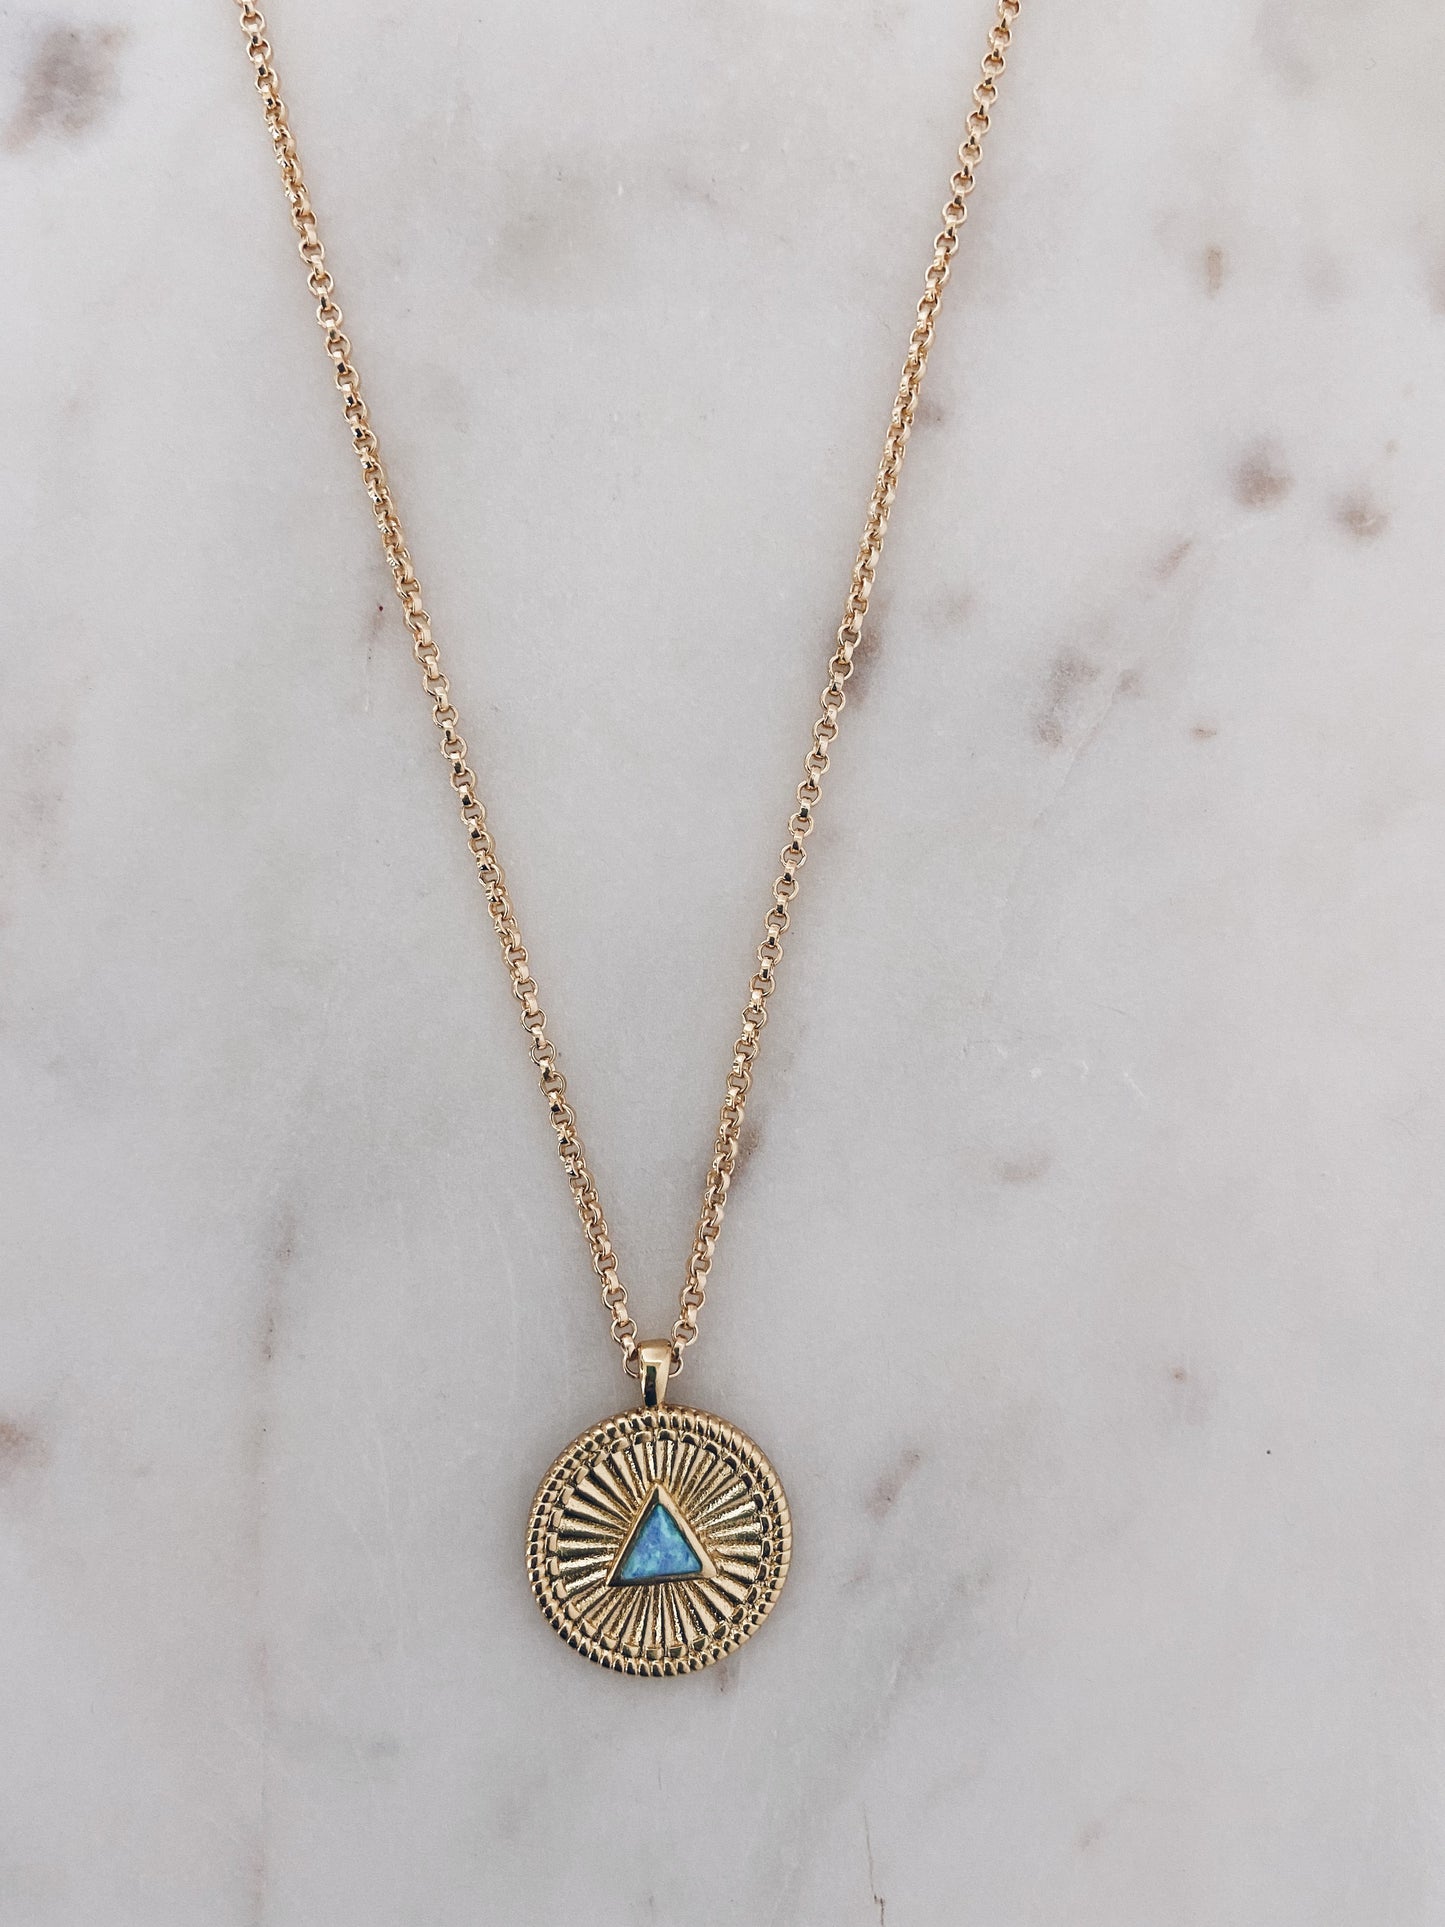 14k Gold Filled Opal Coin Necklace